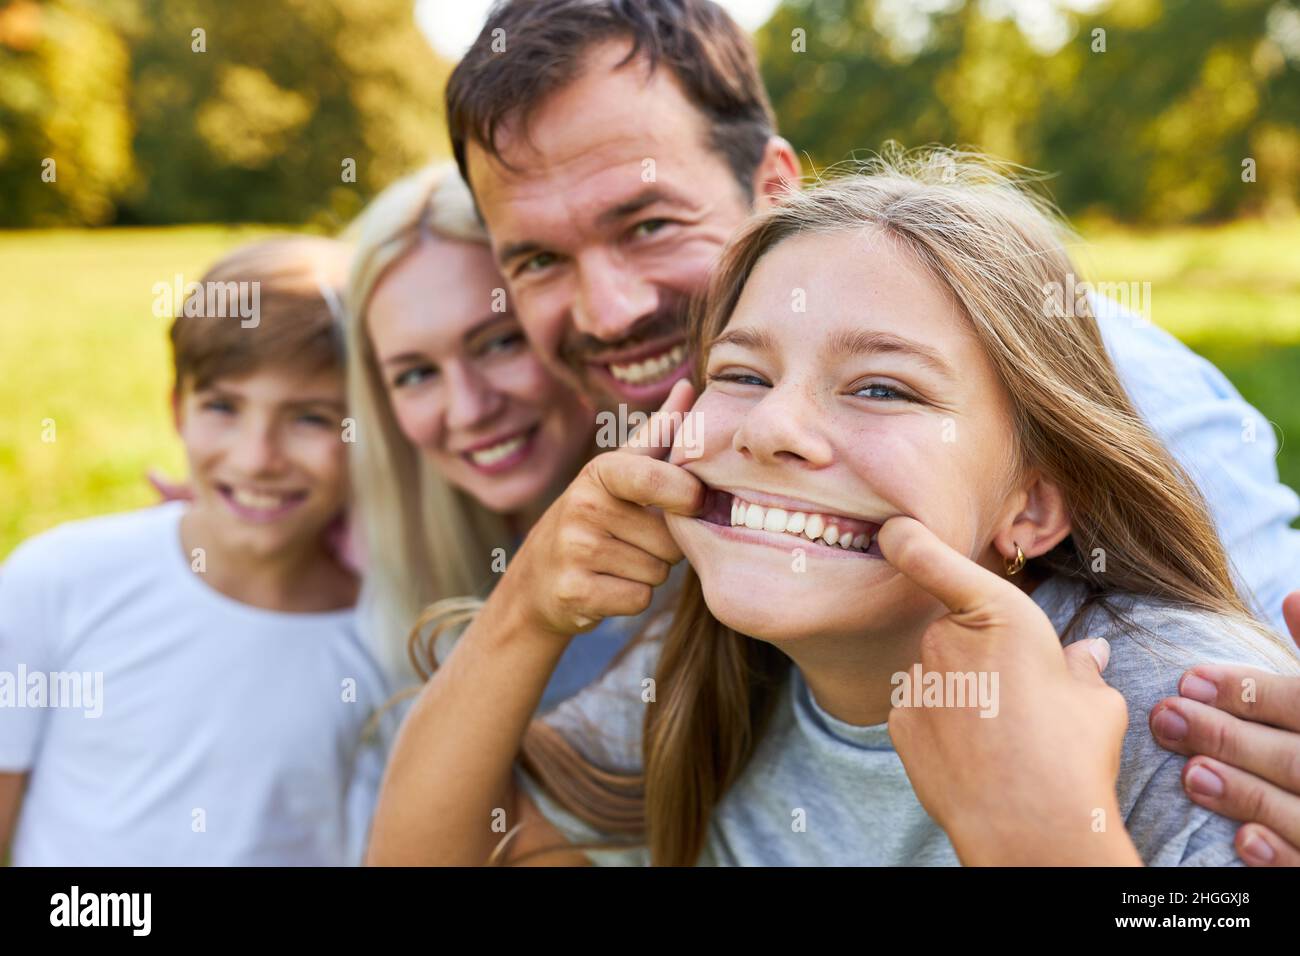 Girl makes a funny grimace with brother and parents in the background in the park Stock Photo